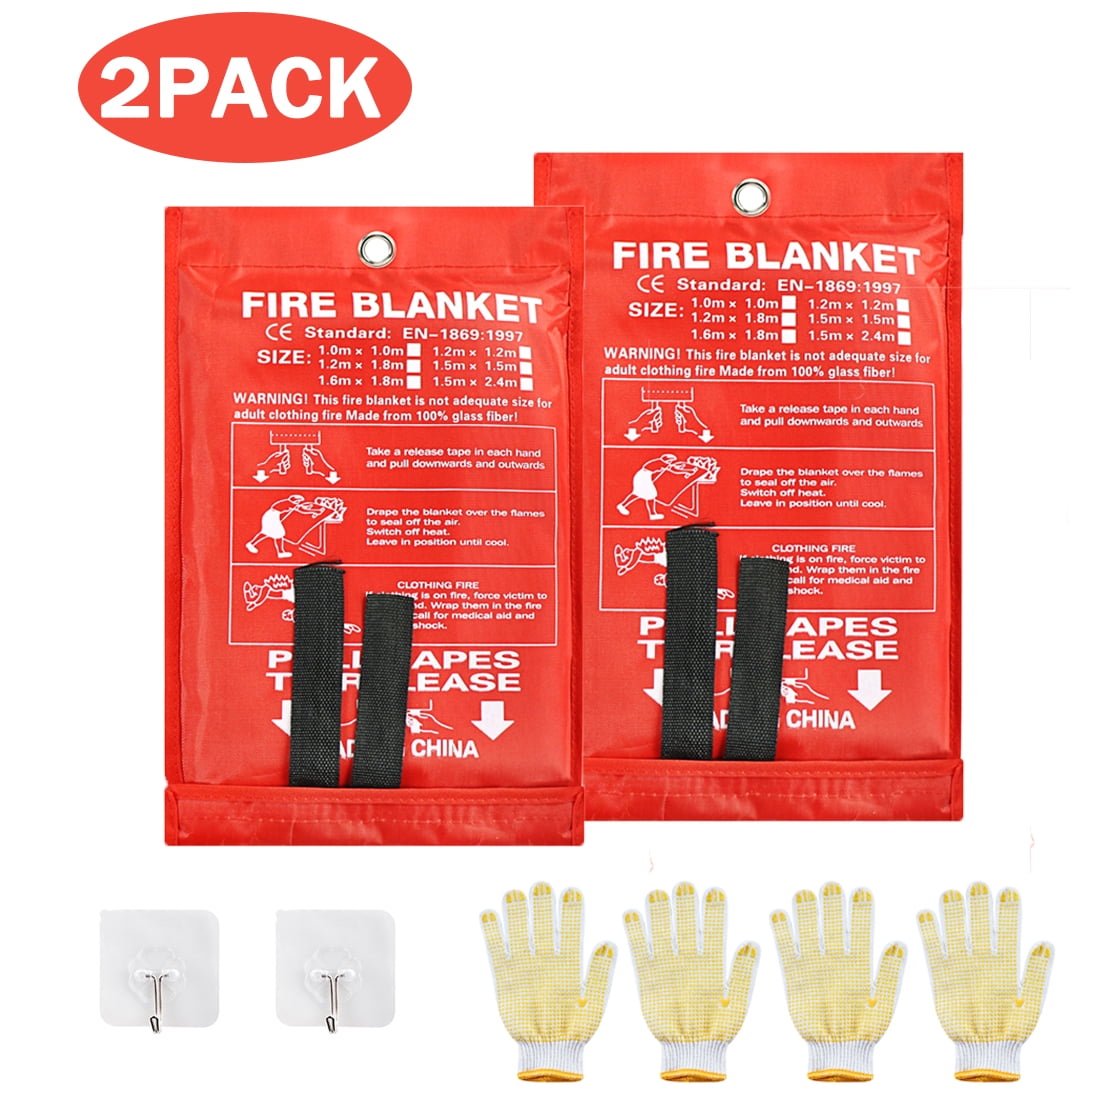 Home + 2 Hooks Camping XL Fire Blanket 47 x 47 Fire Blanket for Home Bundled with Heat-Resistant Gloves Kitchen Grilling 2 Pack Fire Blanket for Car 